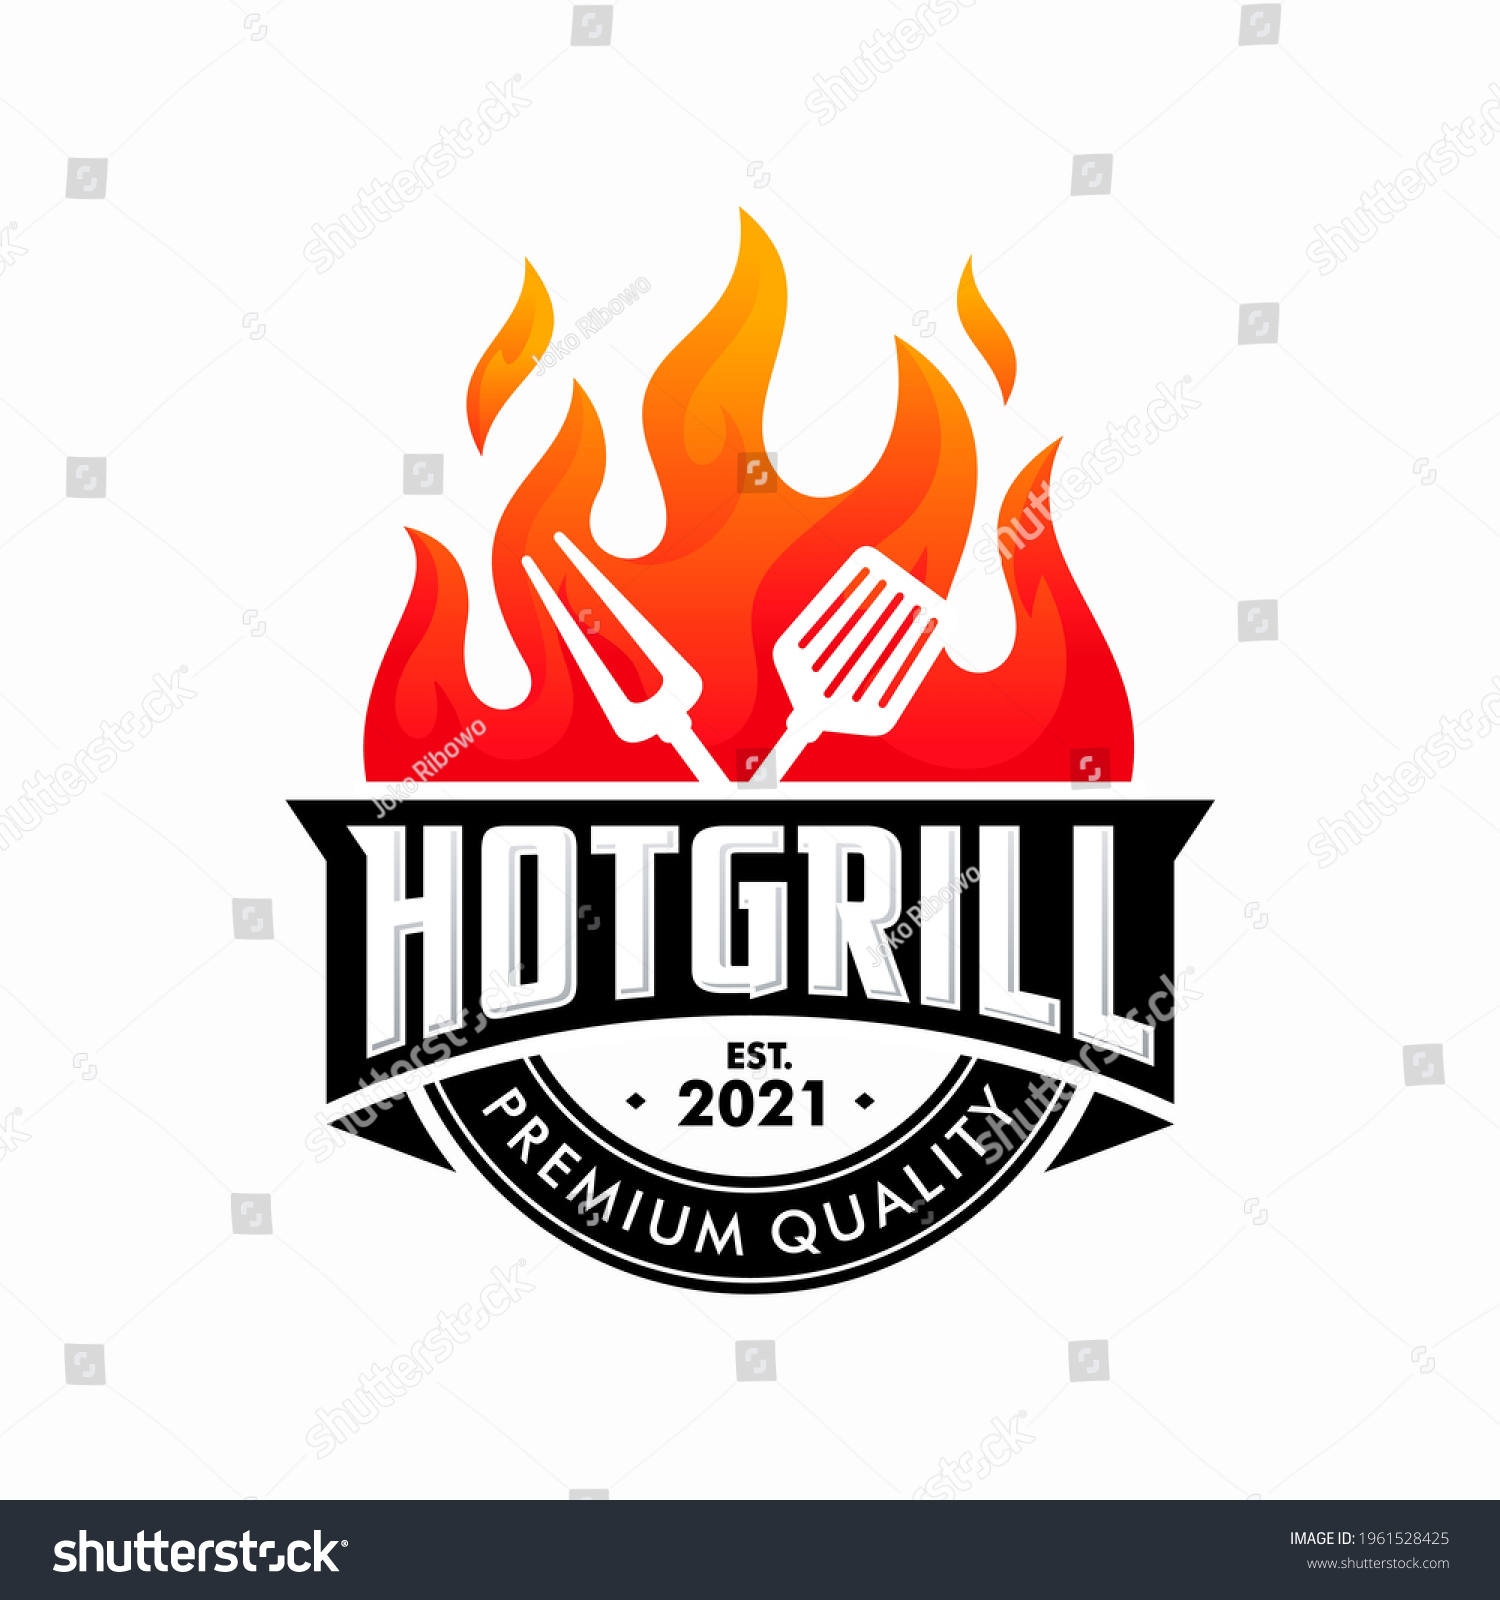 vintage grilled barbecue logo, retro BBQ vector, fire grill food and restaurant icon, Red fire icon
 #1961528425